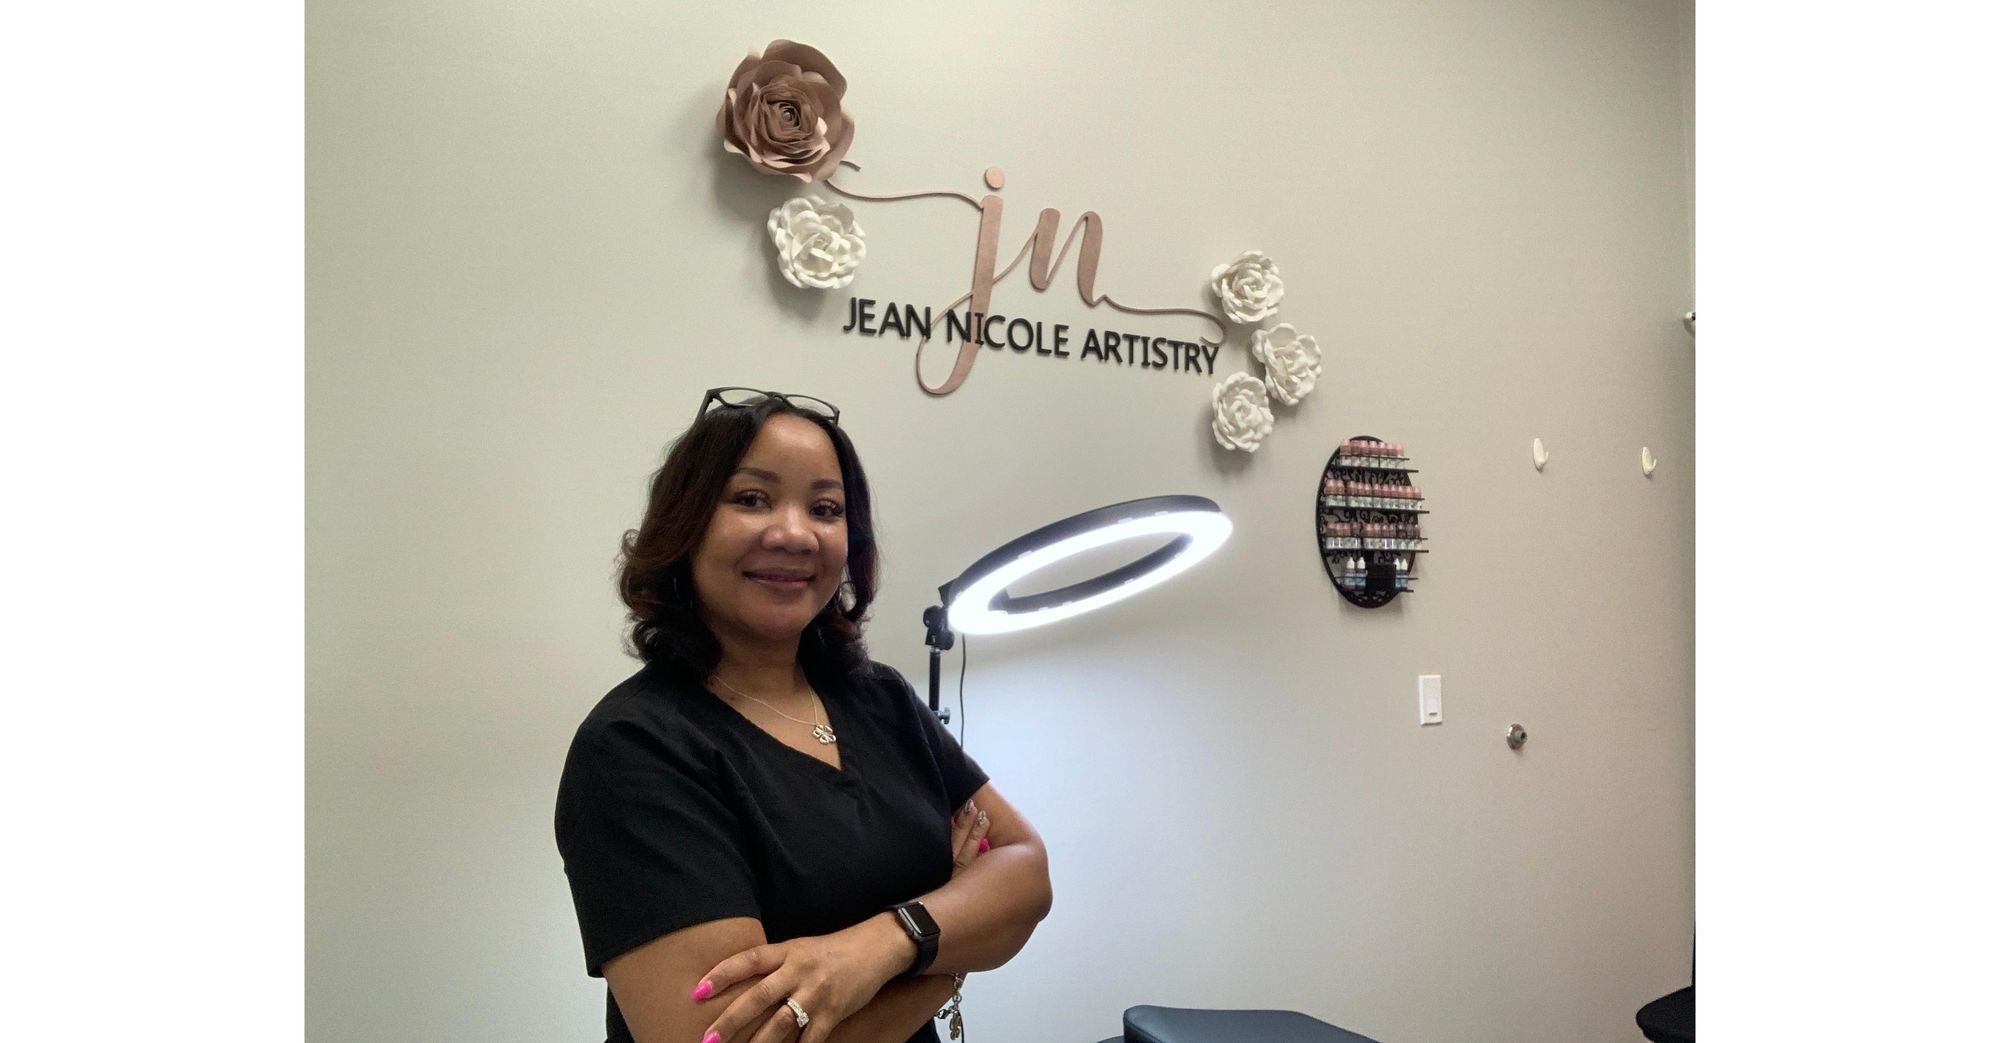 Enhance Your Brows and Lashes - Jean Nicole Artistry